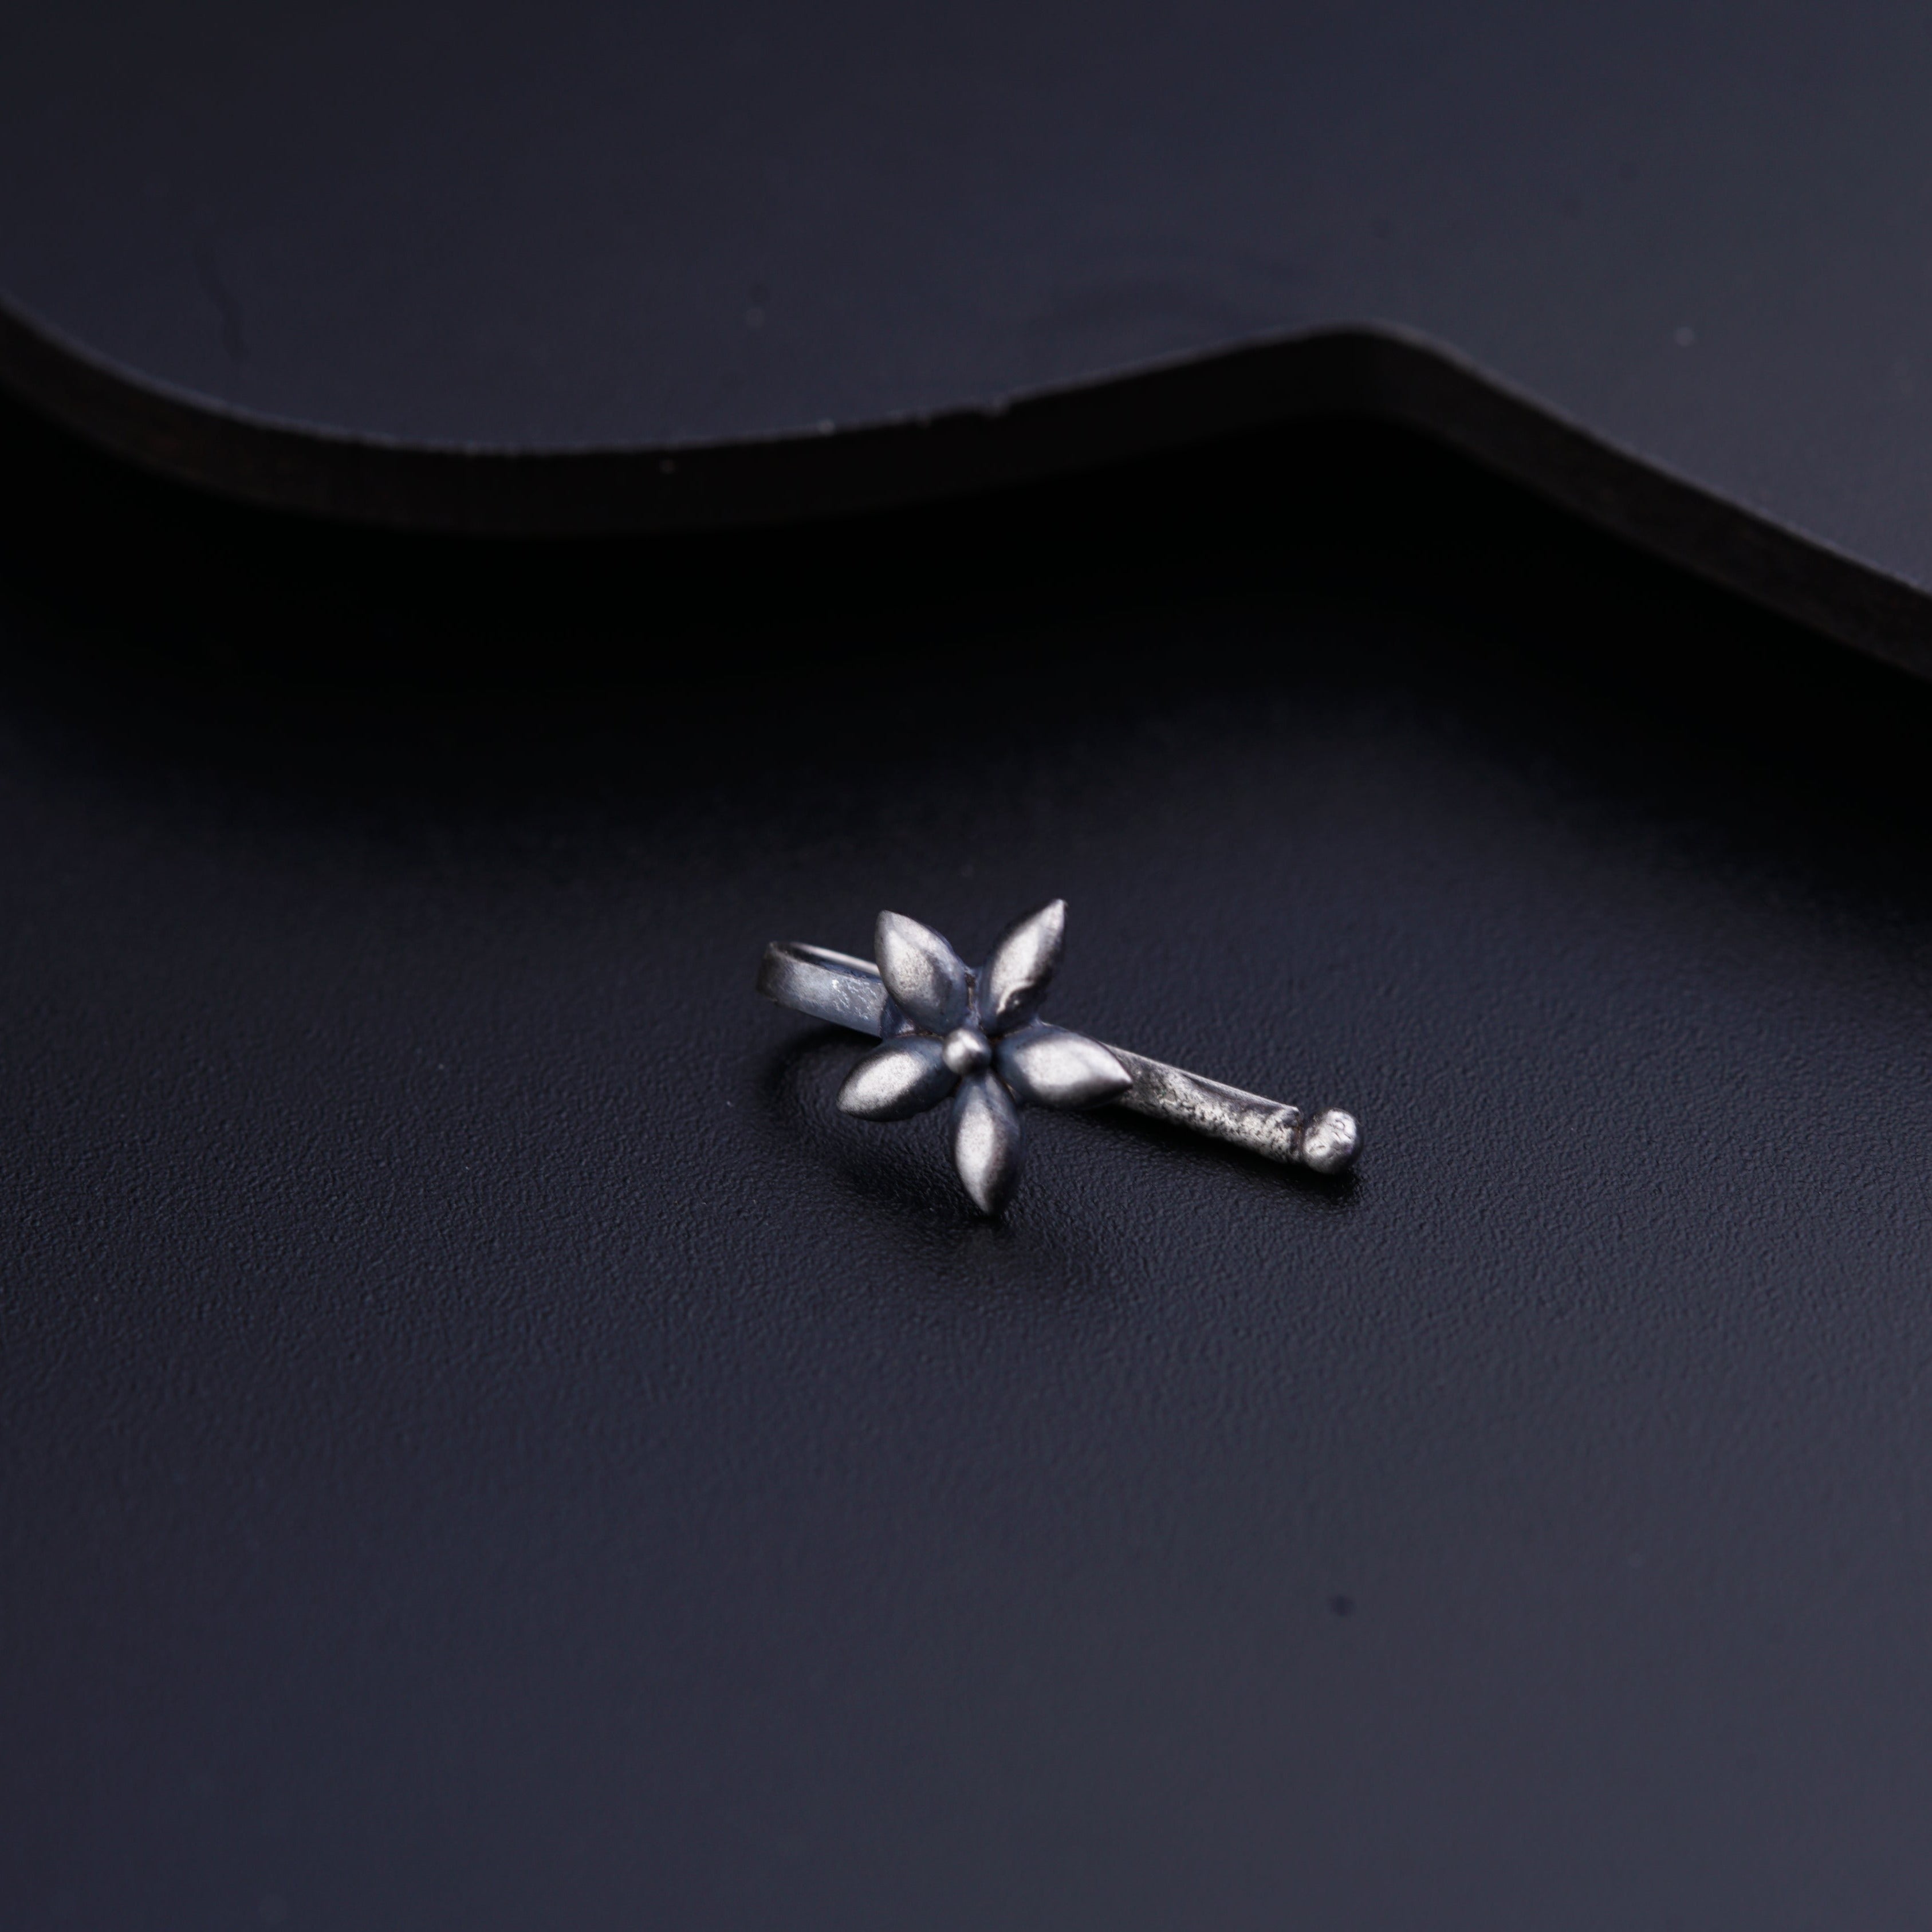 a small metal flower on a black surface